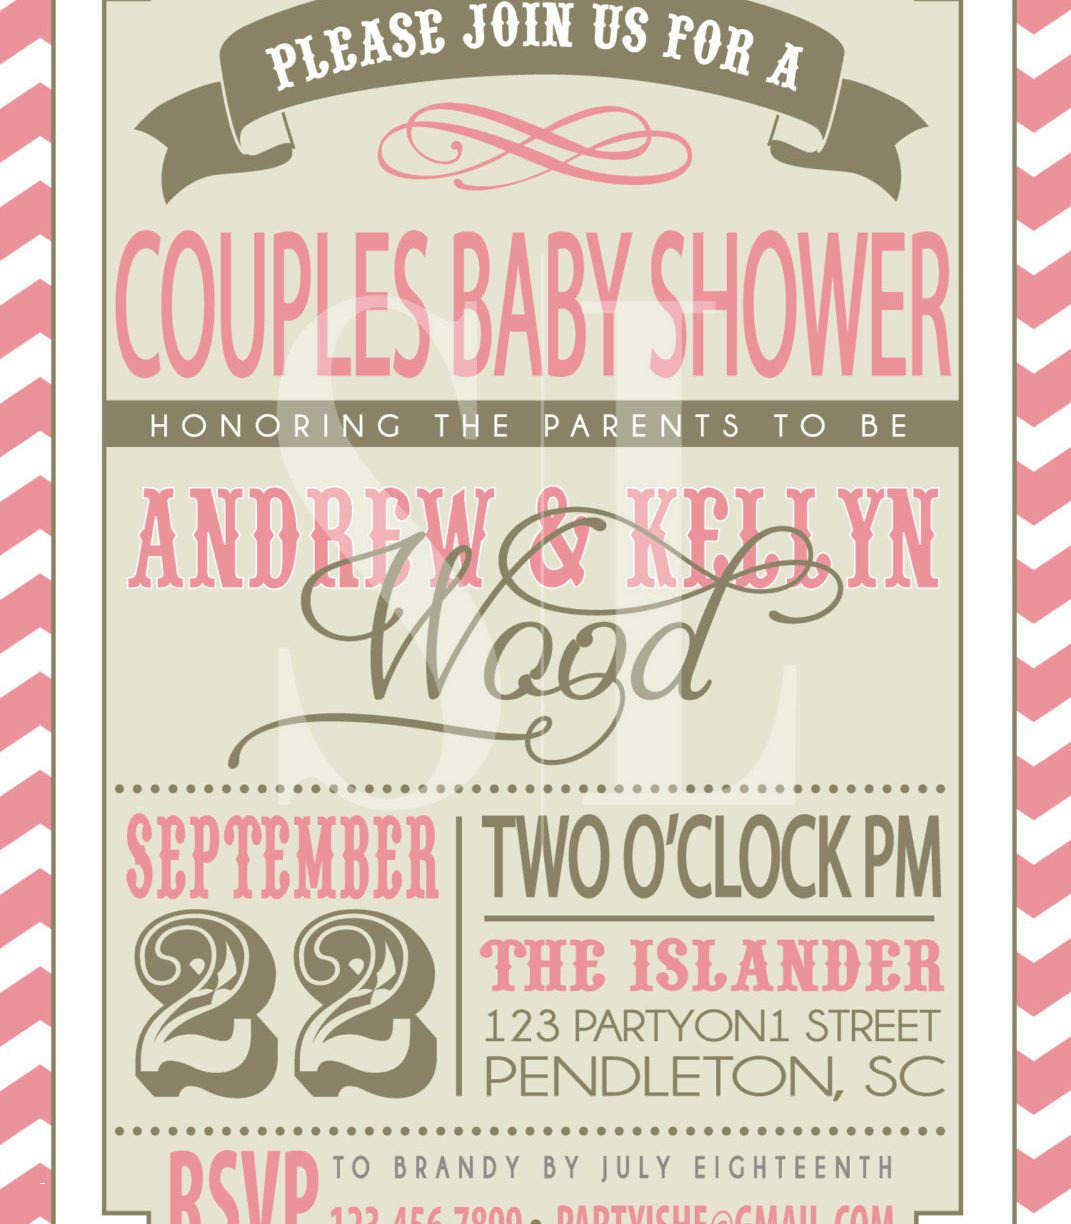 Full Size of Baby Shower:precious Coed Baby Shower Picture Designs Coed Baby Shower Baby Shower Invitation Ecards Best Of Coed Baby Showerions Boy Baby Shower Invitation Ecards Best Of Coed Baby Showerions Boy Girlion Wording Couples Ideas Fun Couple